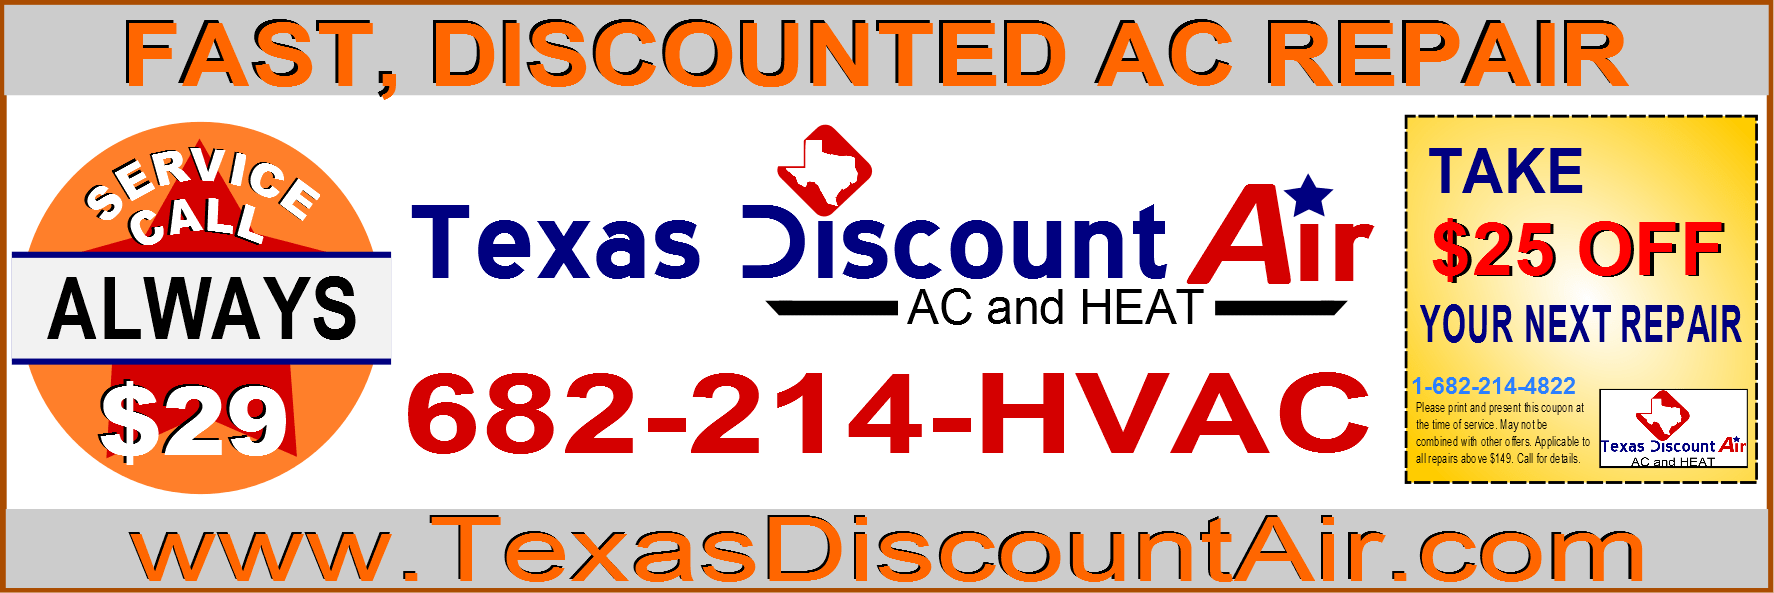 furnace repair Heater not working coupon for $25 discount